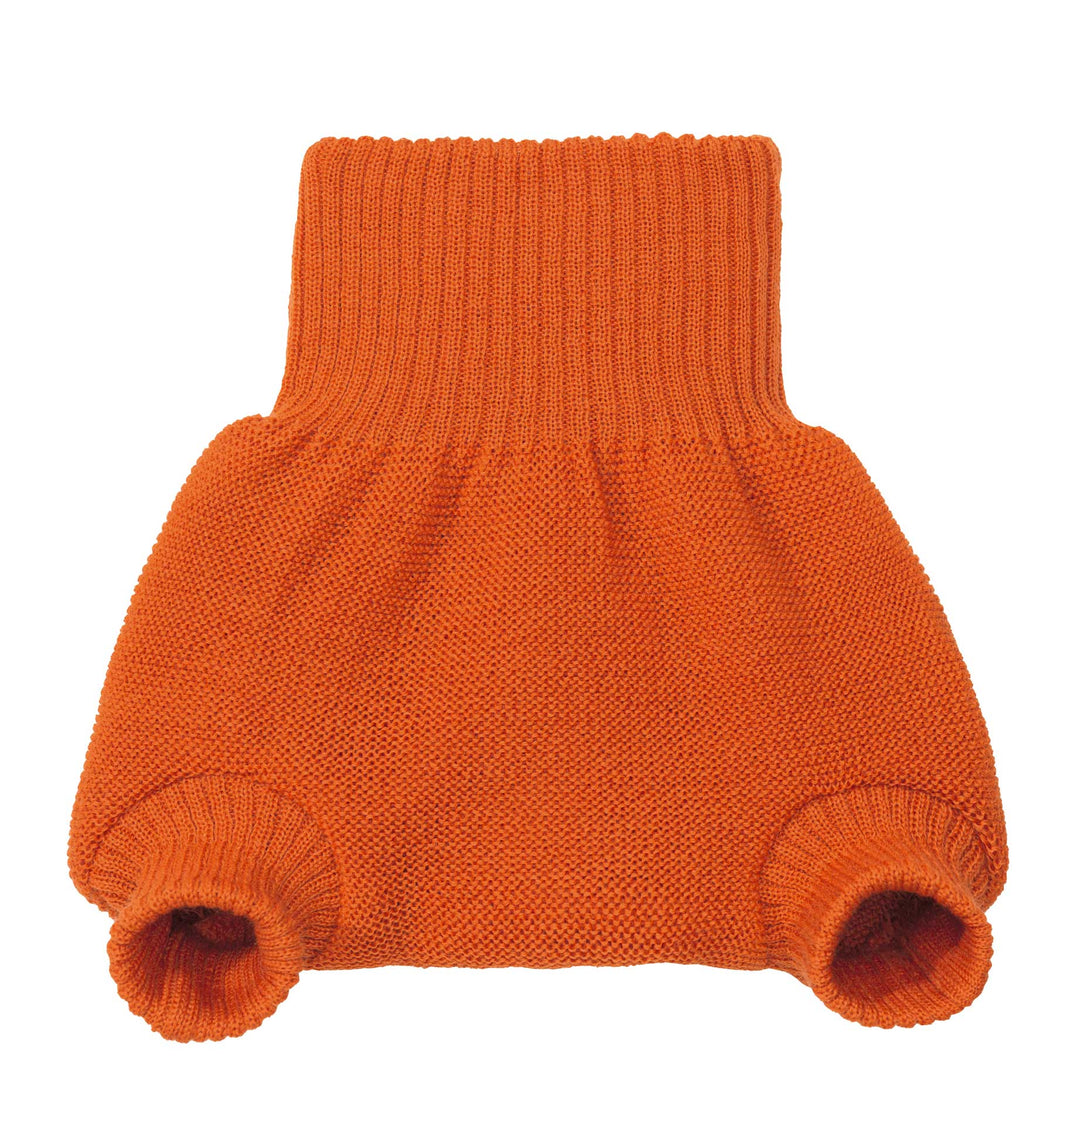 Disana Wool Nappy Cover - Orange|Summer Sweets Baby